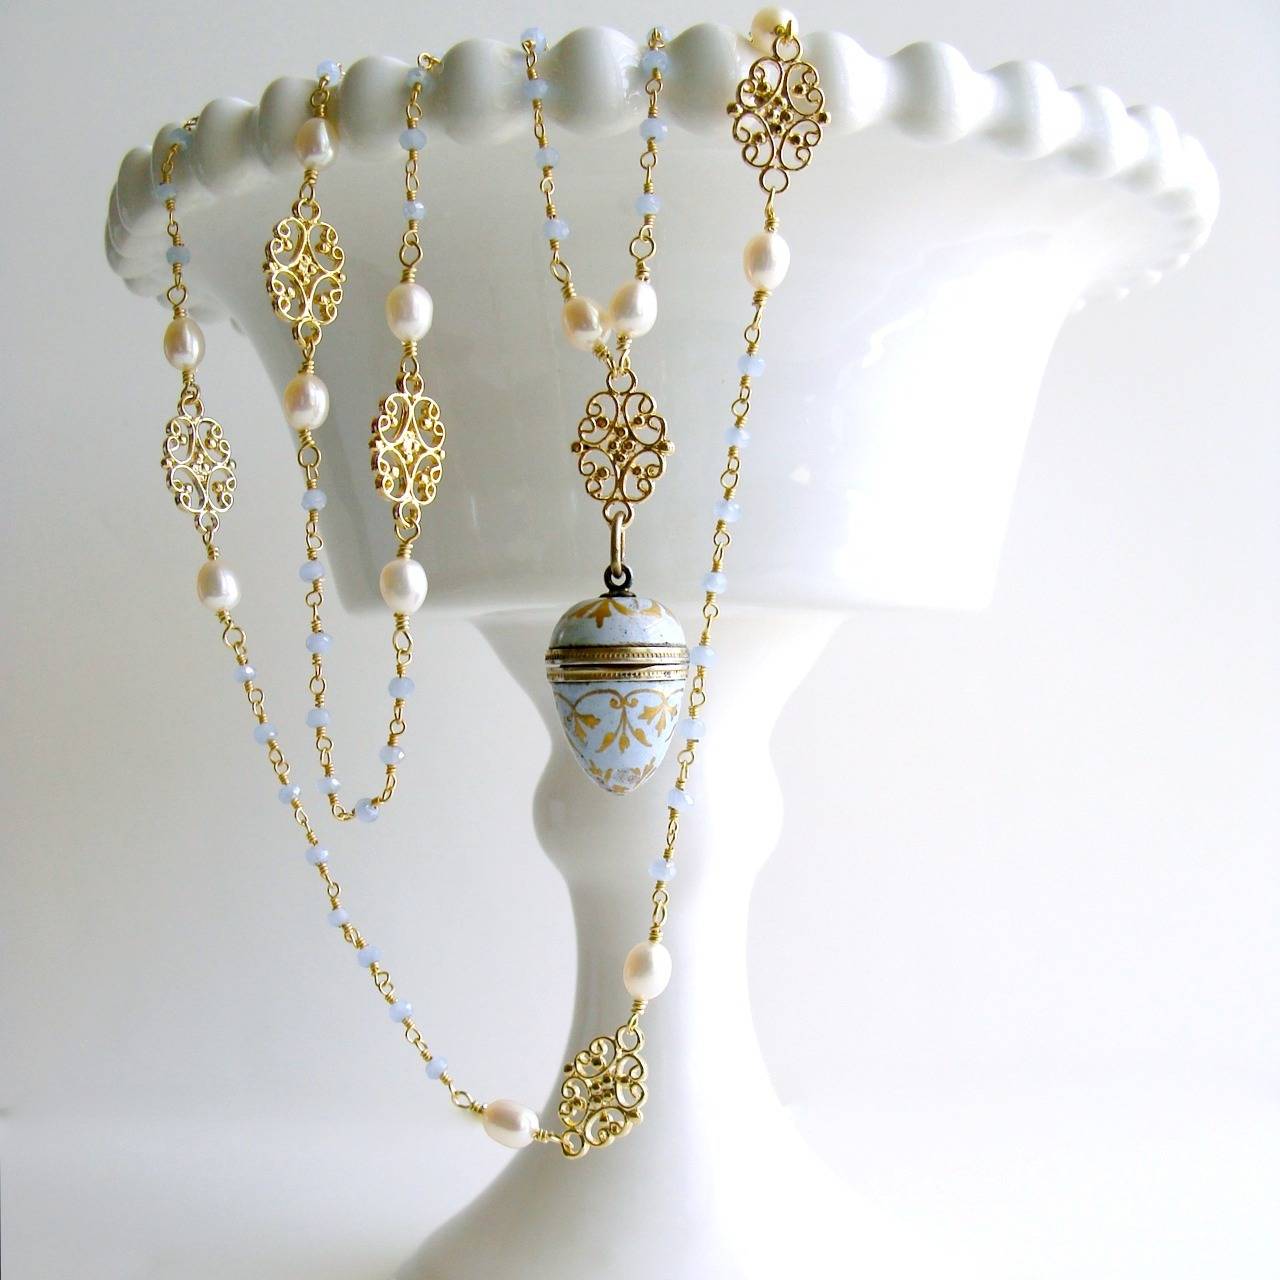 Brezza Dolce III Necklace.

Delicate powder blue hand-linked chalcedony chain is periodically intercepted with stations of creamy pearls flanking a gold vermeil filigree connector to create a gorgeous backdrop for a most charming antique